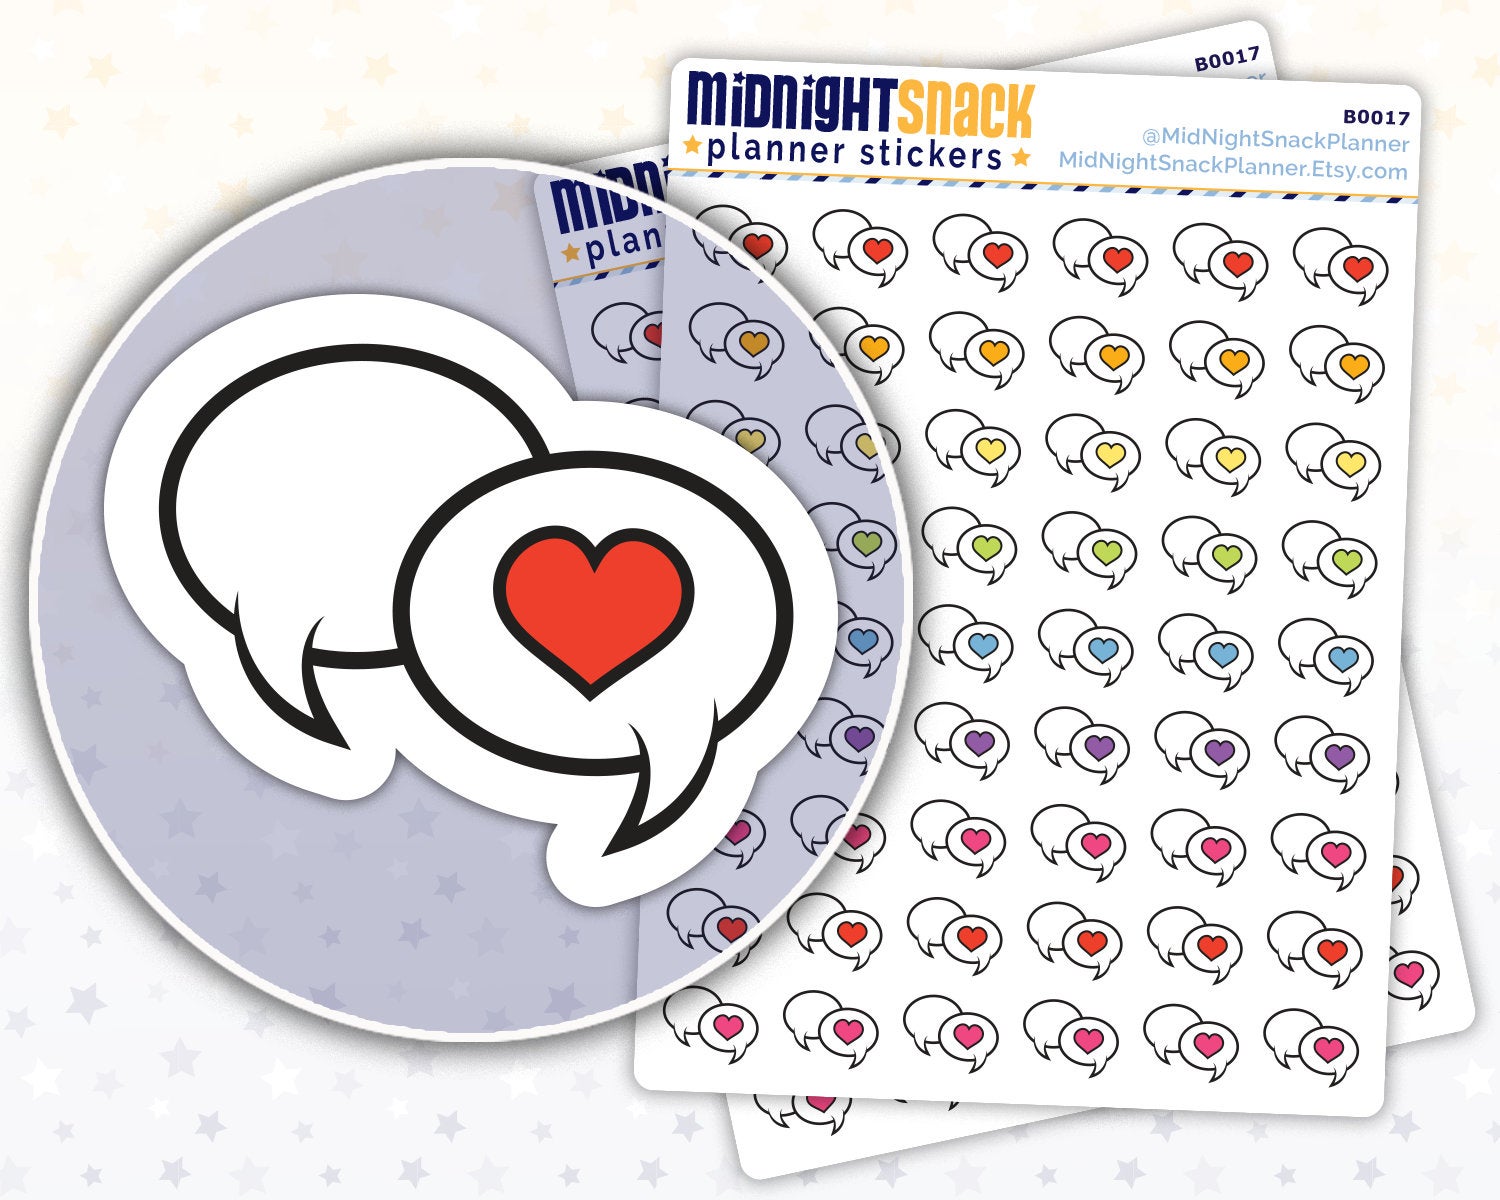 Therapist Appointment Reminder: Mental Health Planner Stickers Midnight Snack Planner